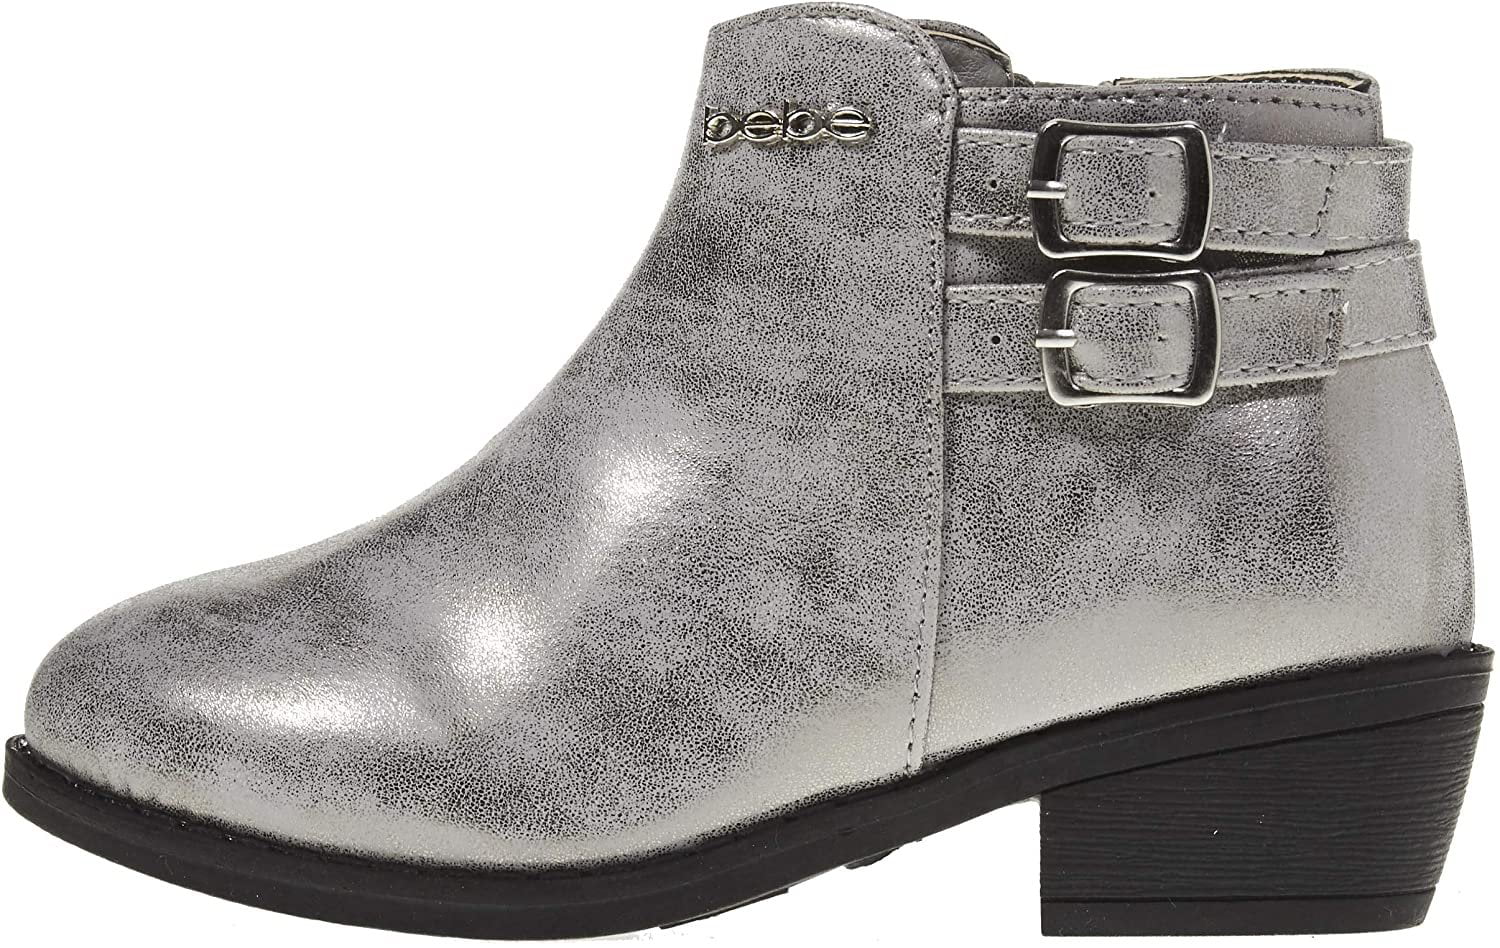 Unisex Boys or Girls Metallic Ankle Boots Booties Compact Punk Style Toddler Little Kids 12, Metallic Silver 